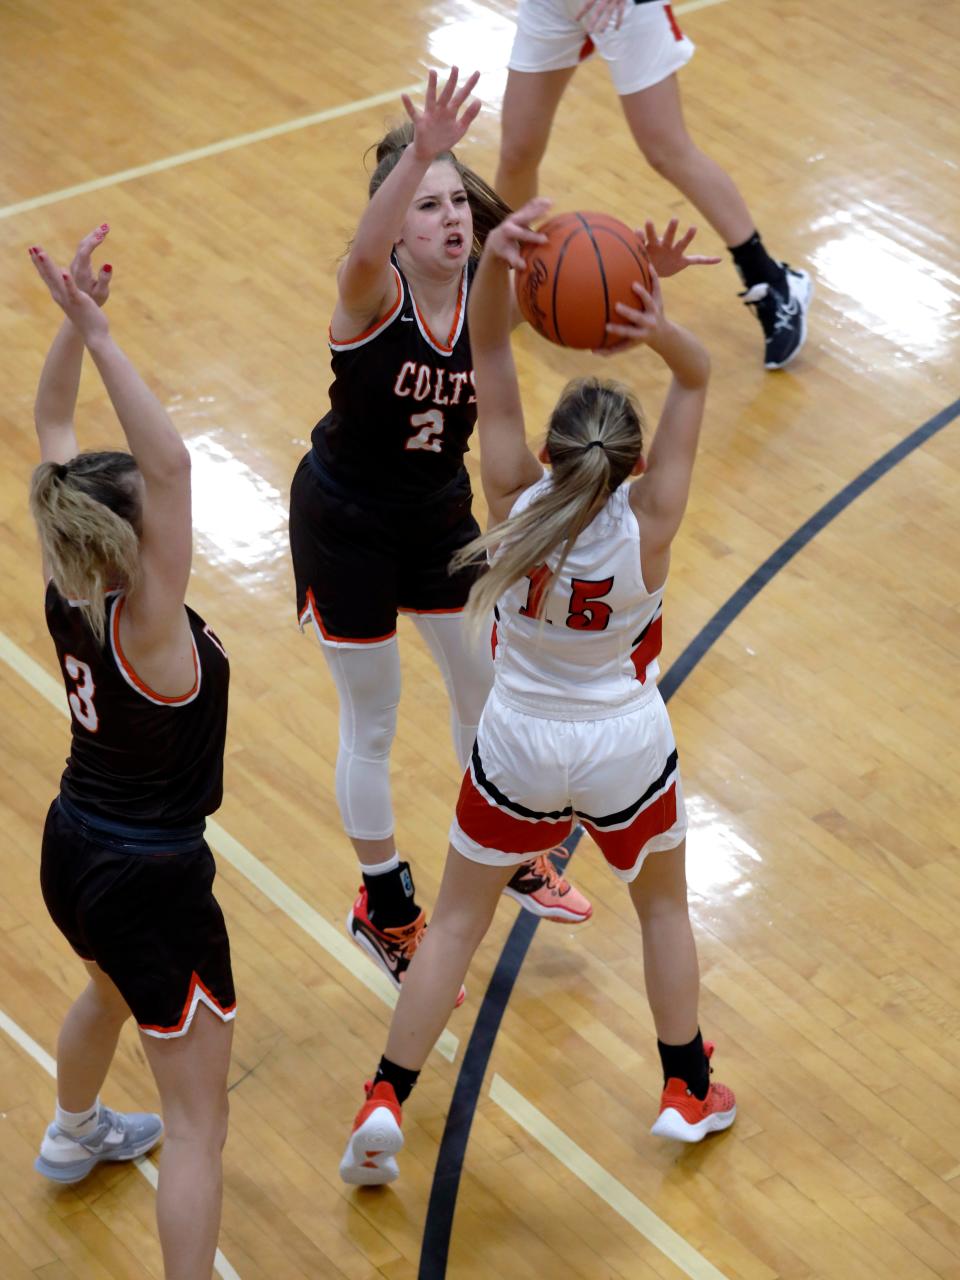 Karly Launder, left, and Kenli Norman trap Isabelle Lauvray during Meadowbrook's 61-33 win against host Coshocton on Wednesday night at The Wigwam. The Colts led by as many as 34 points in the second half.